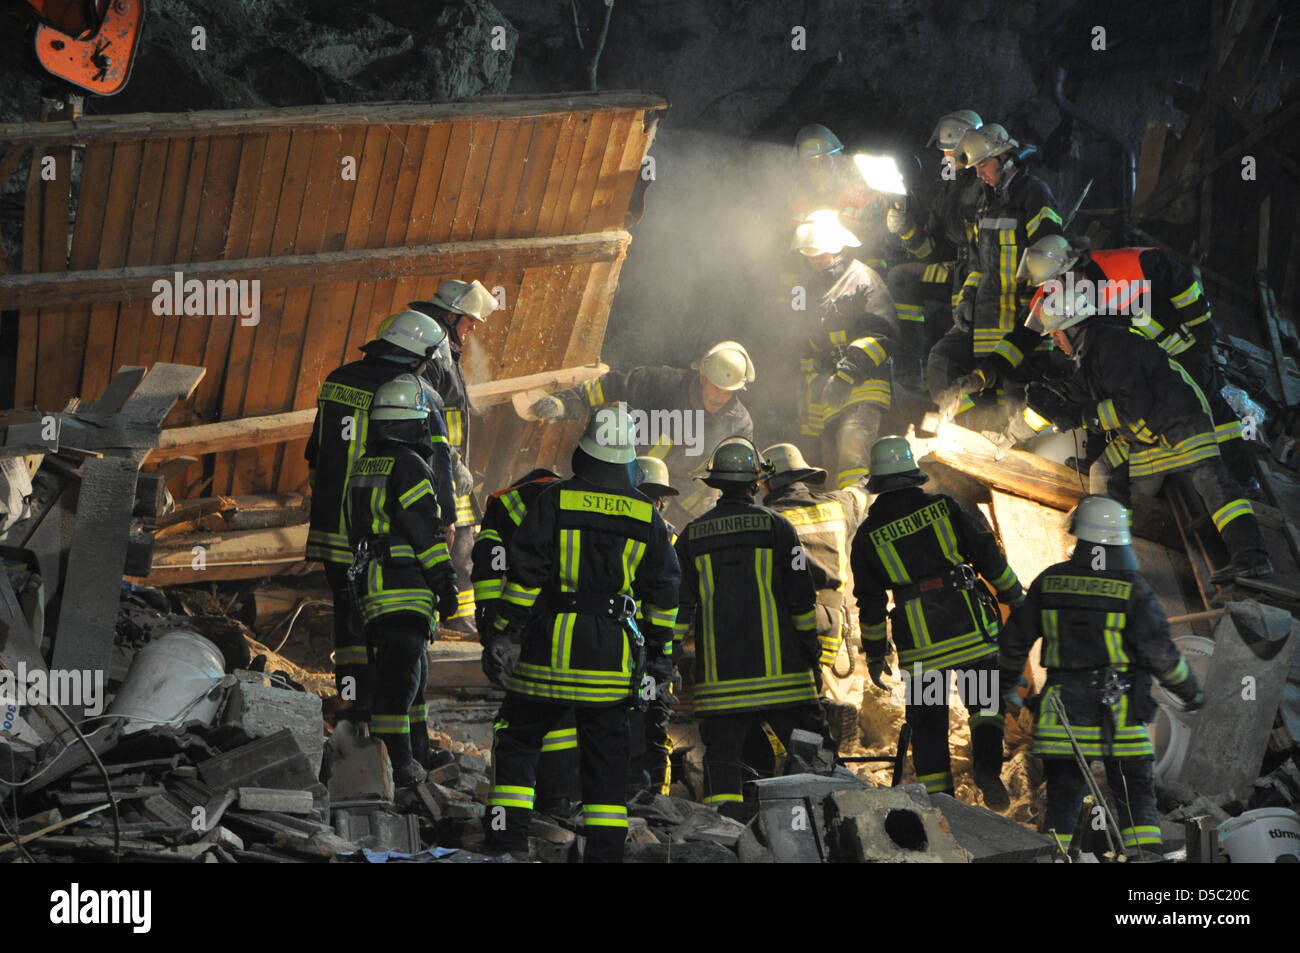 Fire fighters search for victims at the scene of the accident where a house was destroyed through a rockfall in Stein an der Traun, Germany, 25 January 2010. A massive rockfall onto an one family house killed a father and his 18-year-old daughter. The 40-year-old wife and mother, as also her 16-year-old son were rescued with injuries at the early morning. Photo: Grotemeyer Stock Photo